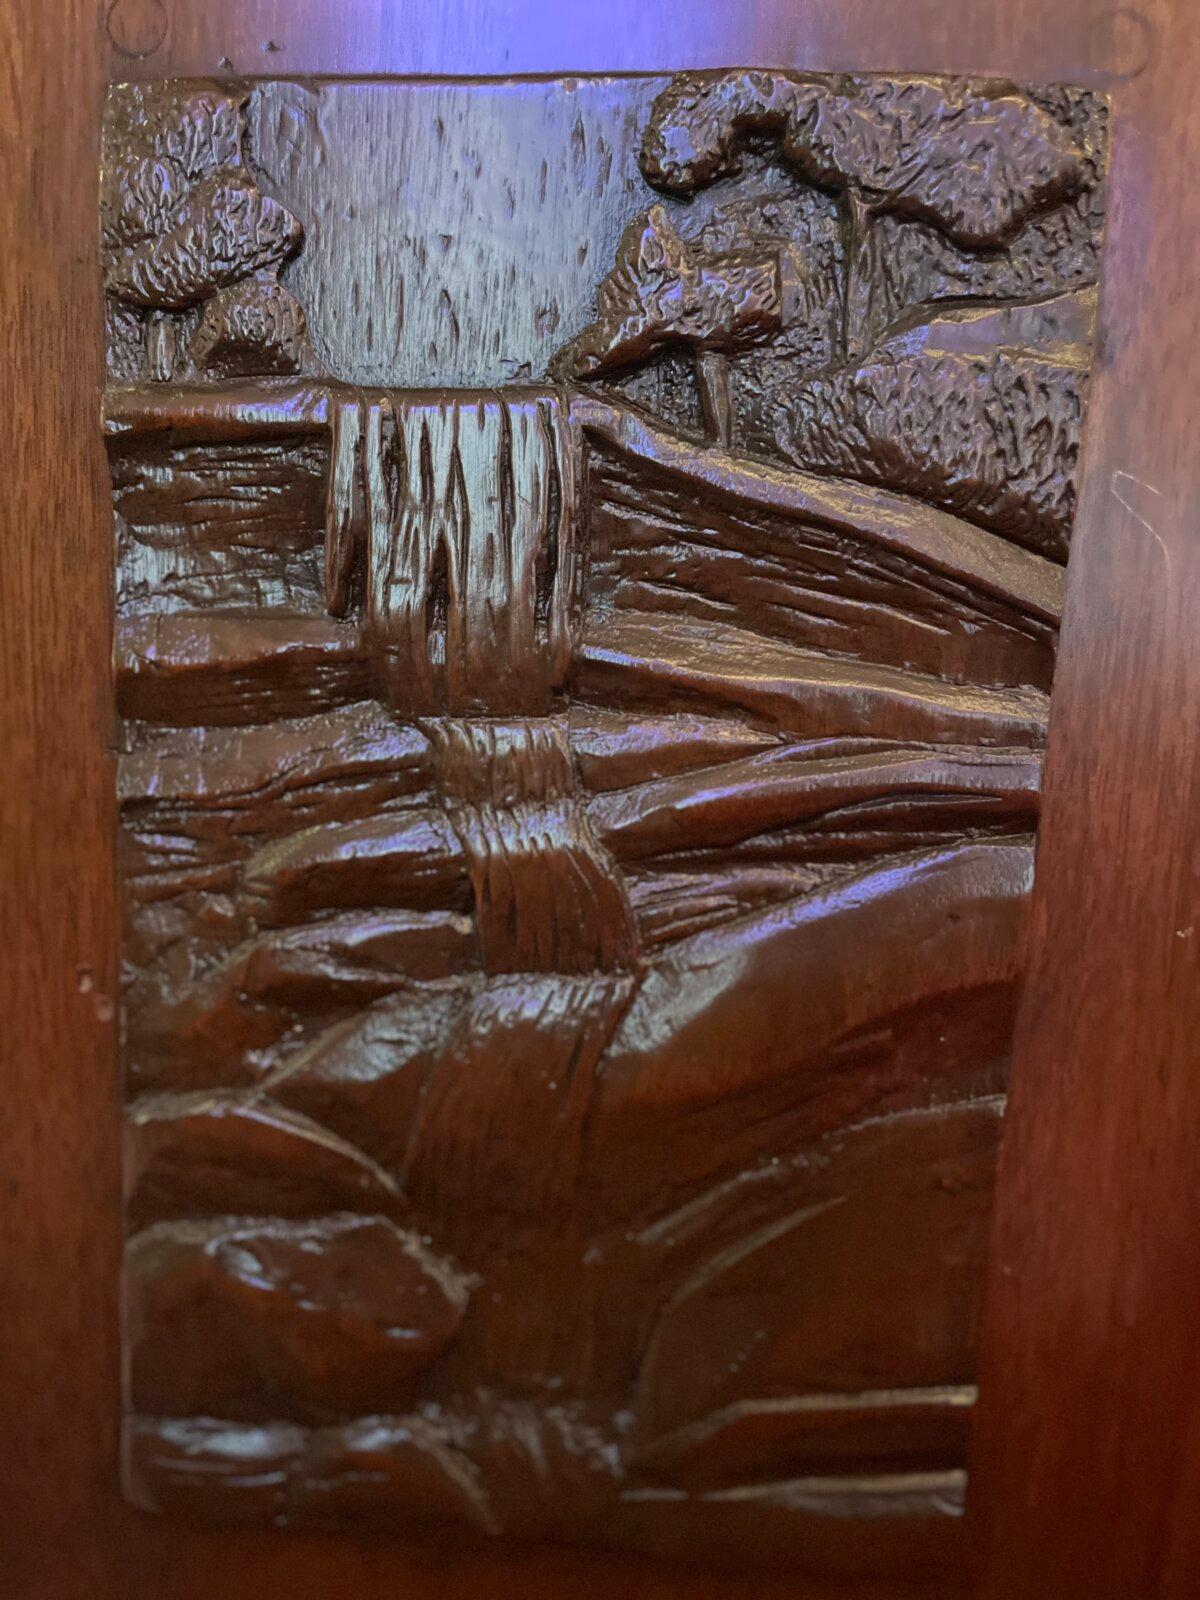 The carving of Highlands Falls on the pulpit in First Presbyterian Church of Highlands. (Courtesy of Deena Bouknight)